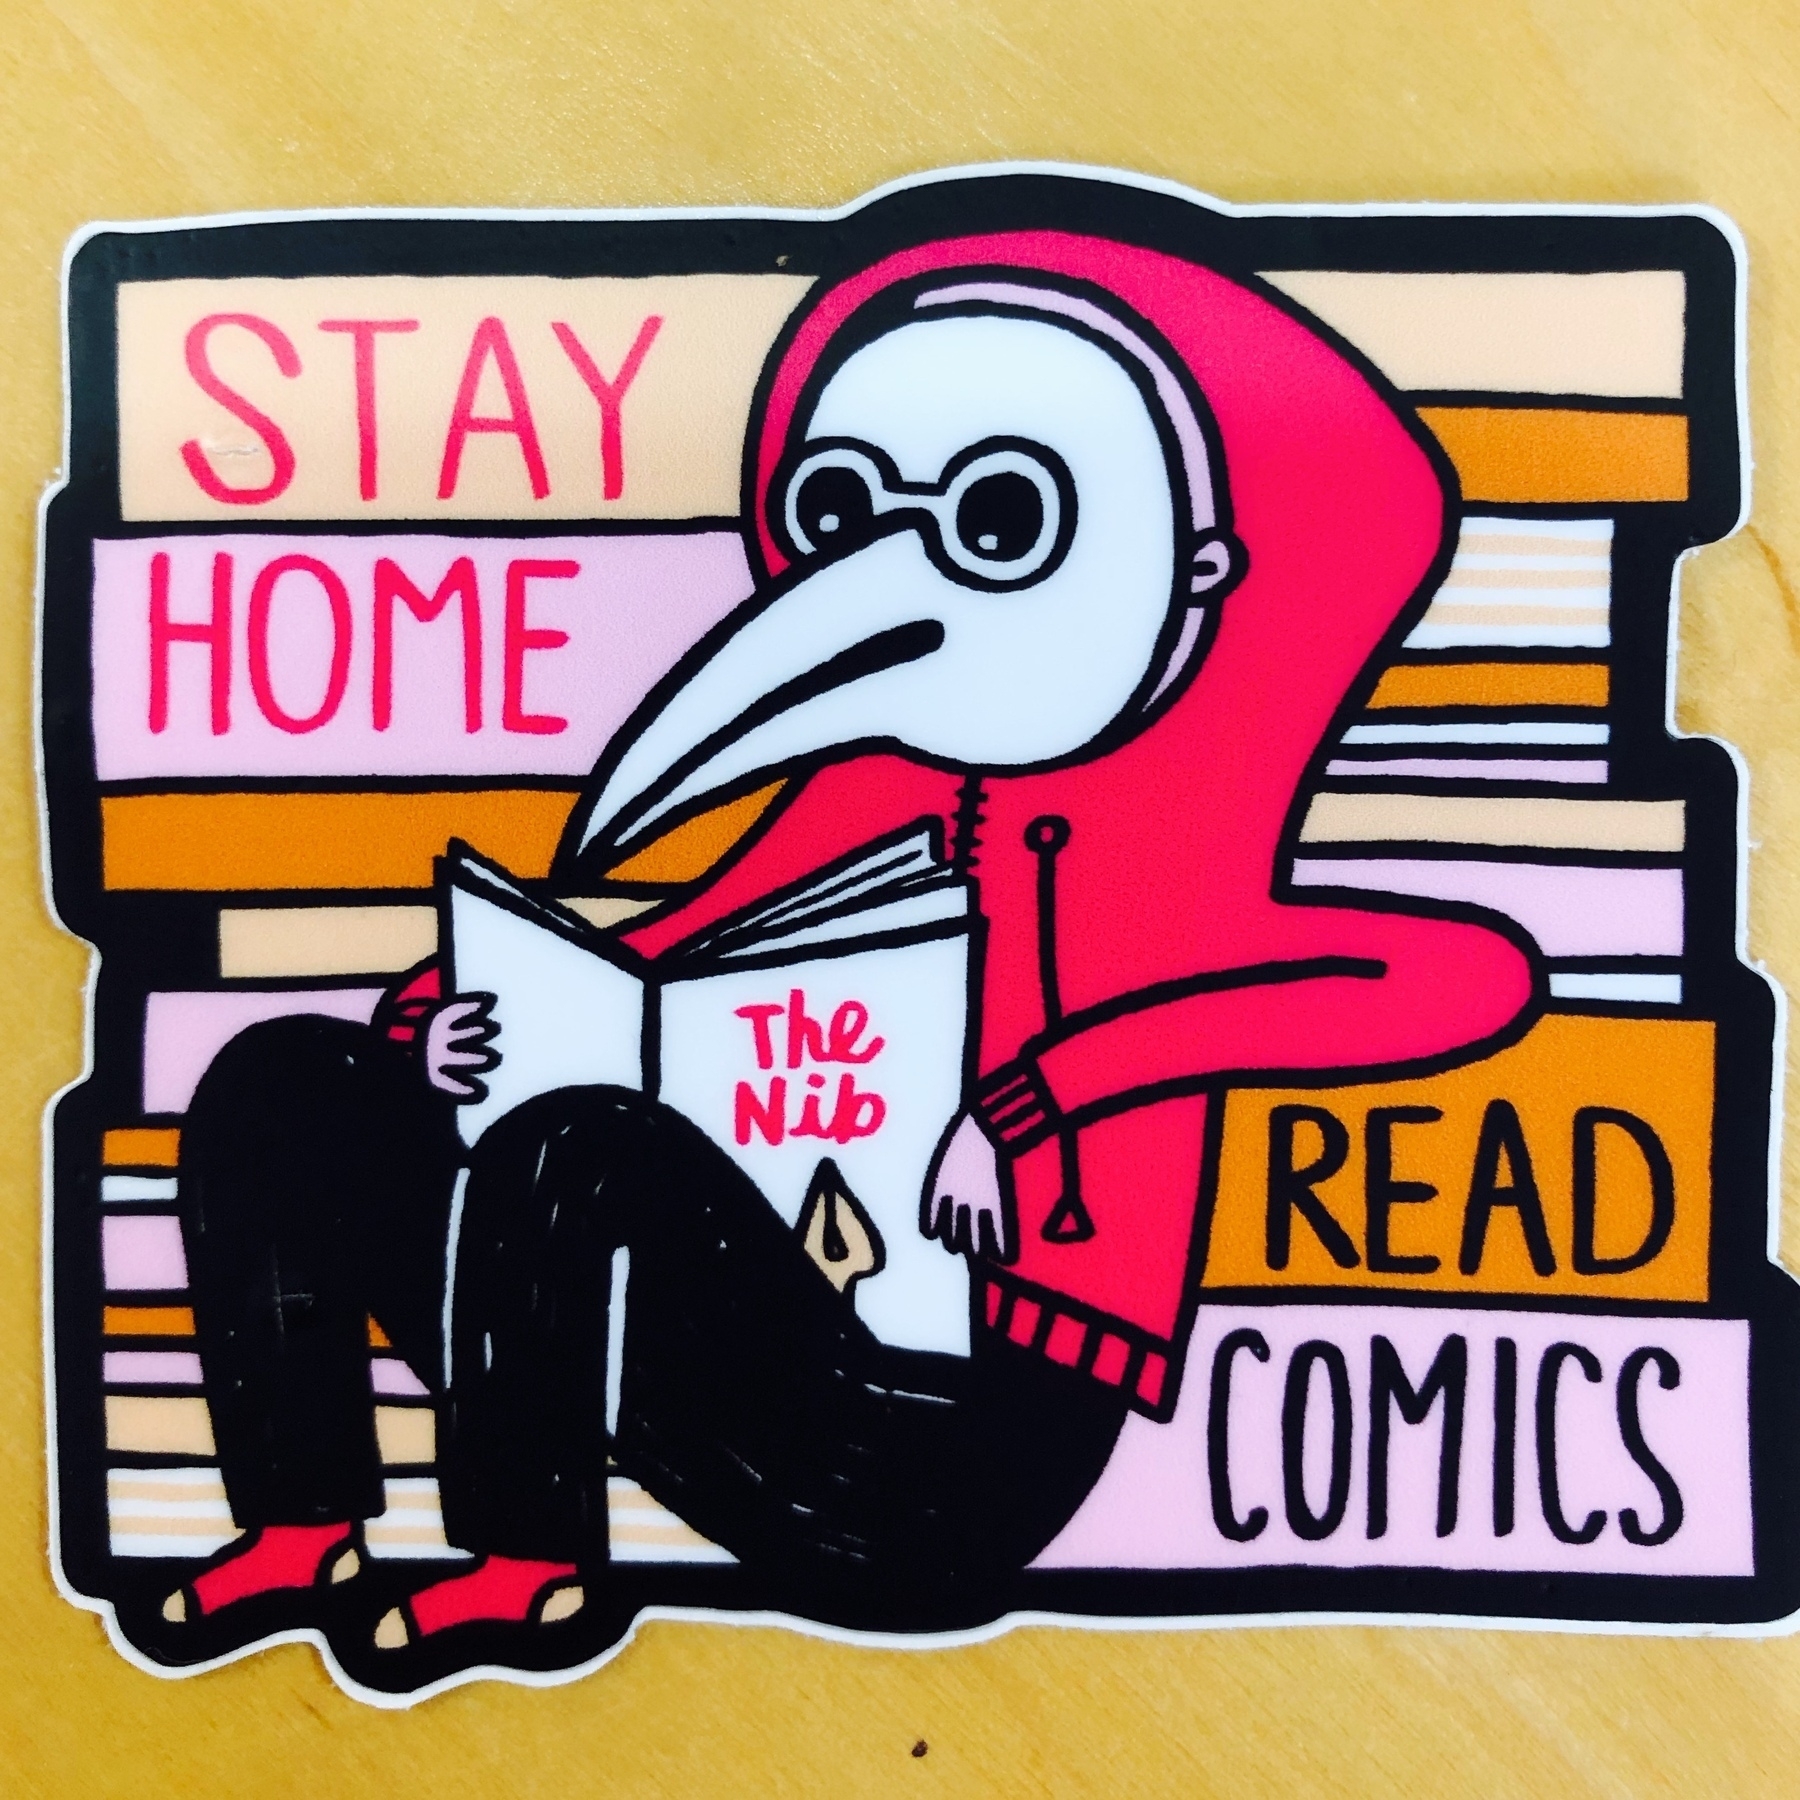 A sticker from The Nib saying "Stay Home, Read Comics"